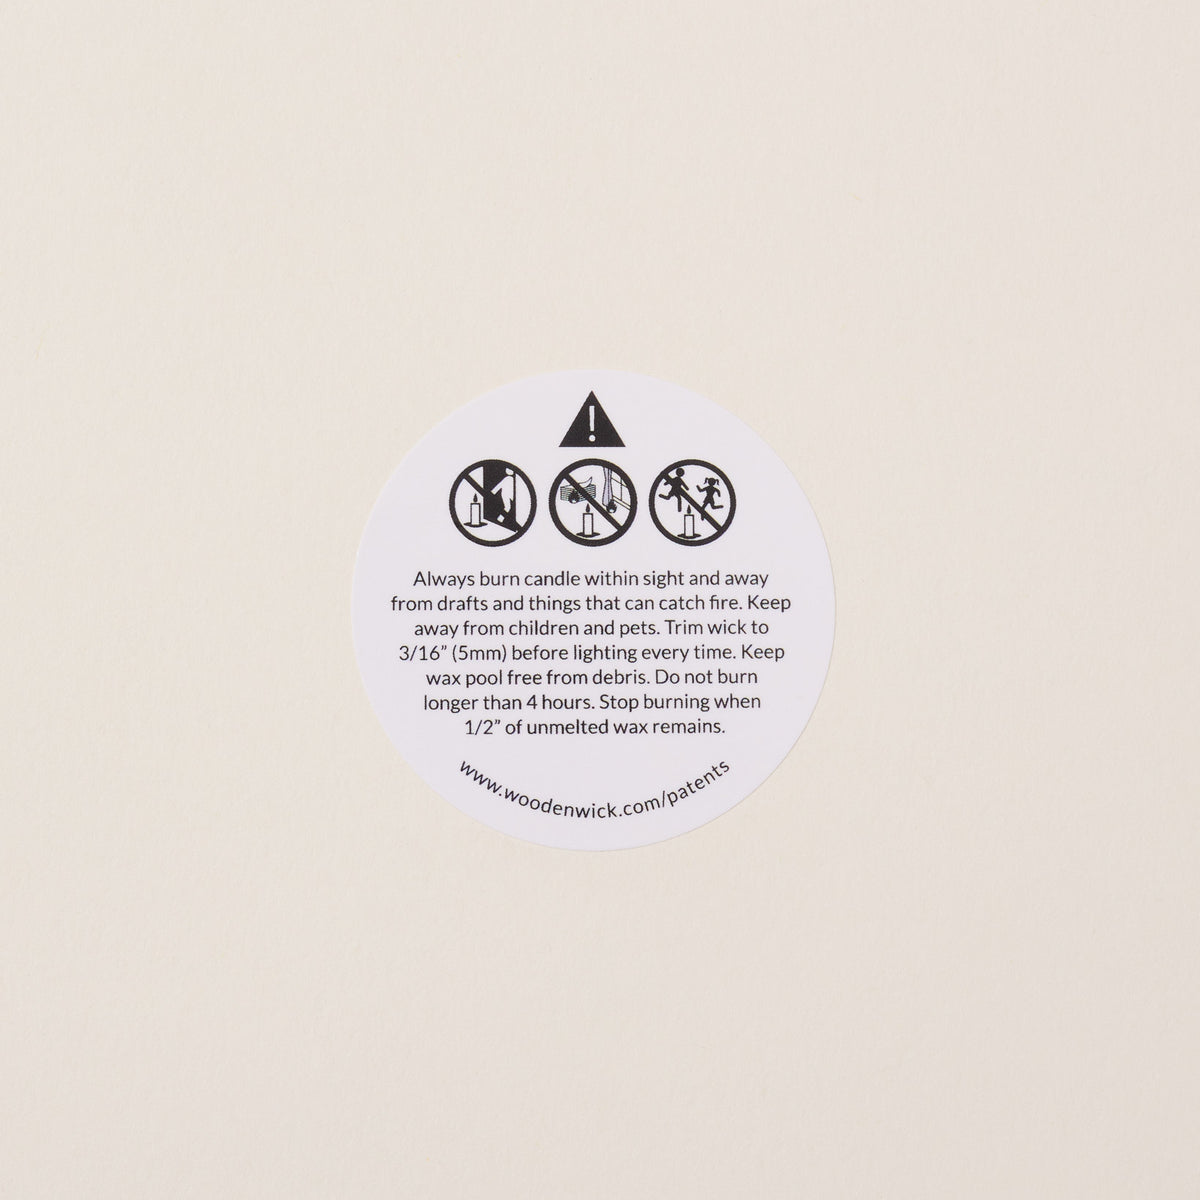 Candle Making Warning, Safety Labels / stickers Sow Wax Melts Various Qty  1043